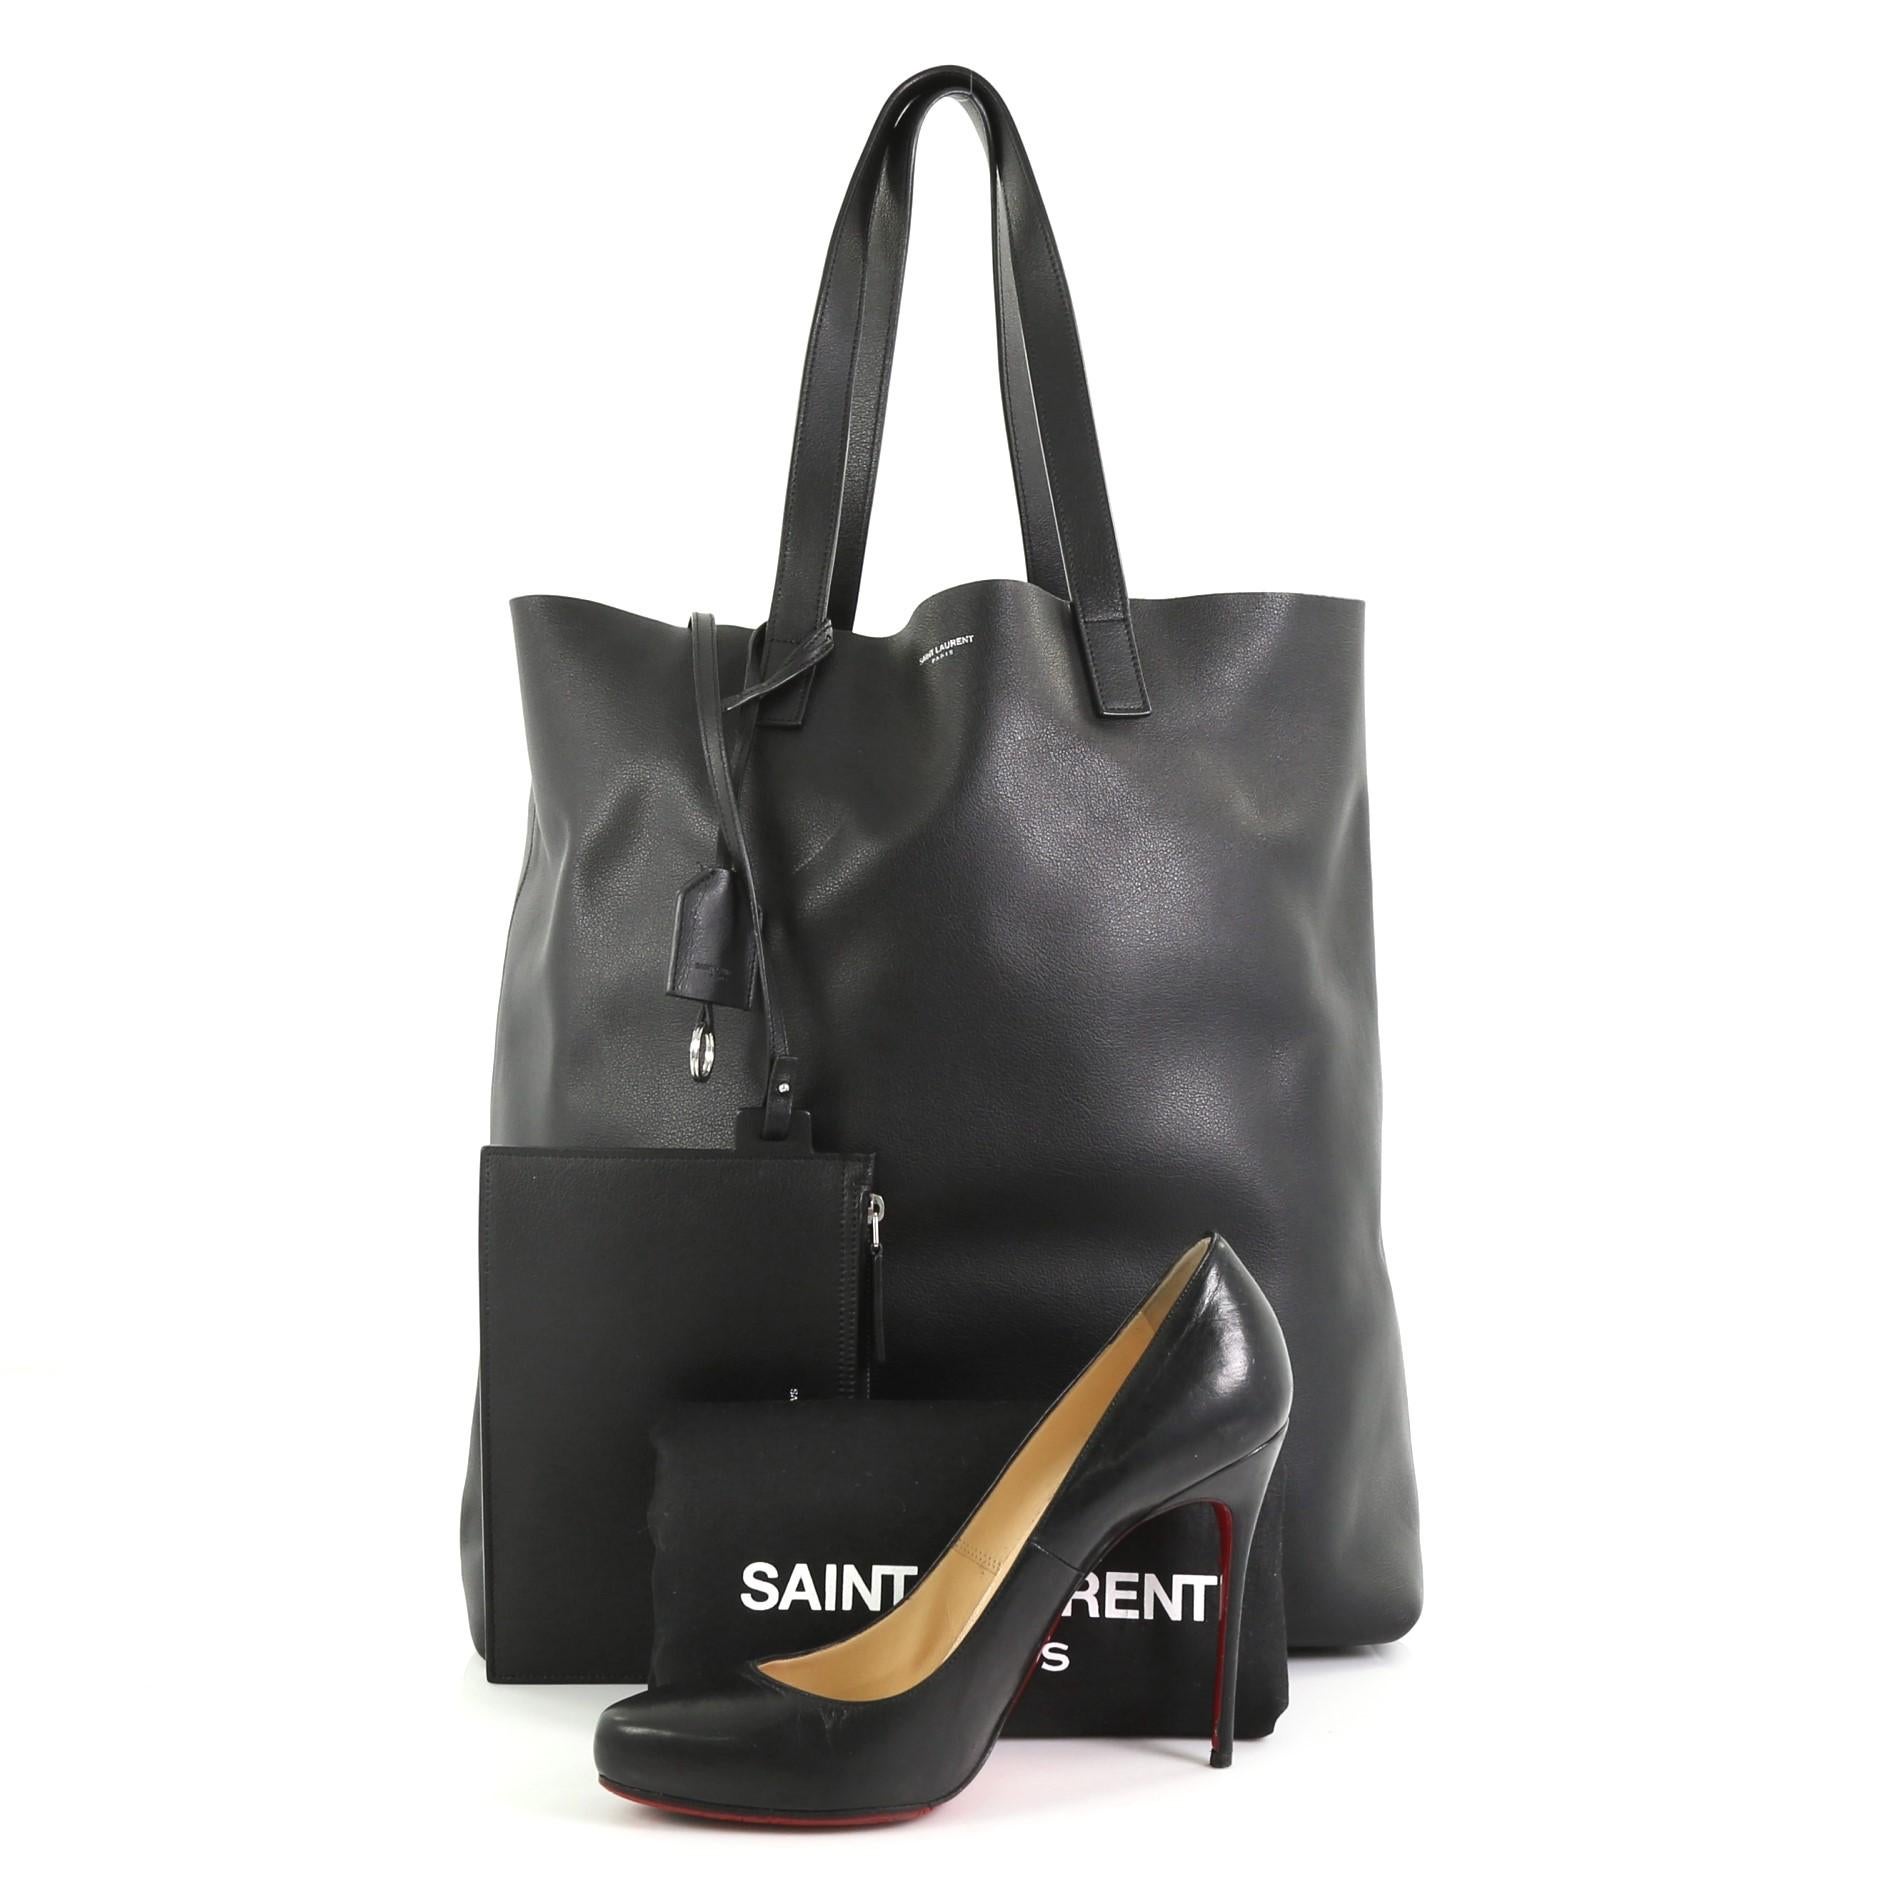 This Saint Laurent Bold Tote Leather Medium, crafted in black leather, features dual leather handles, stamped Saint Laurent logo, and silver-tone hardware. It opens to a black raw leather interior. **Note: Shoe photographed is used as a sizing